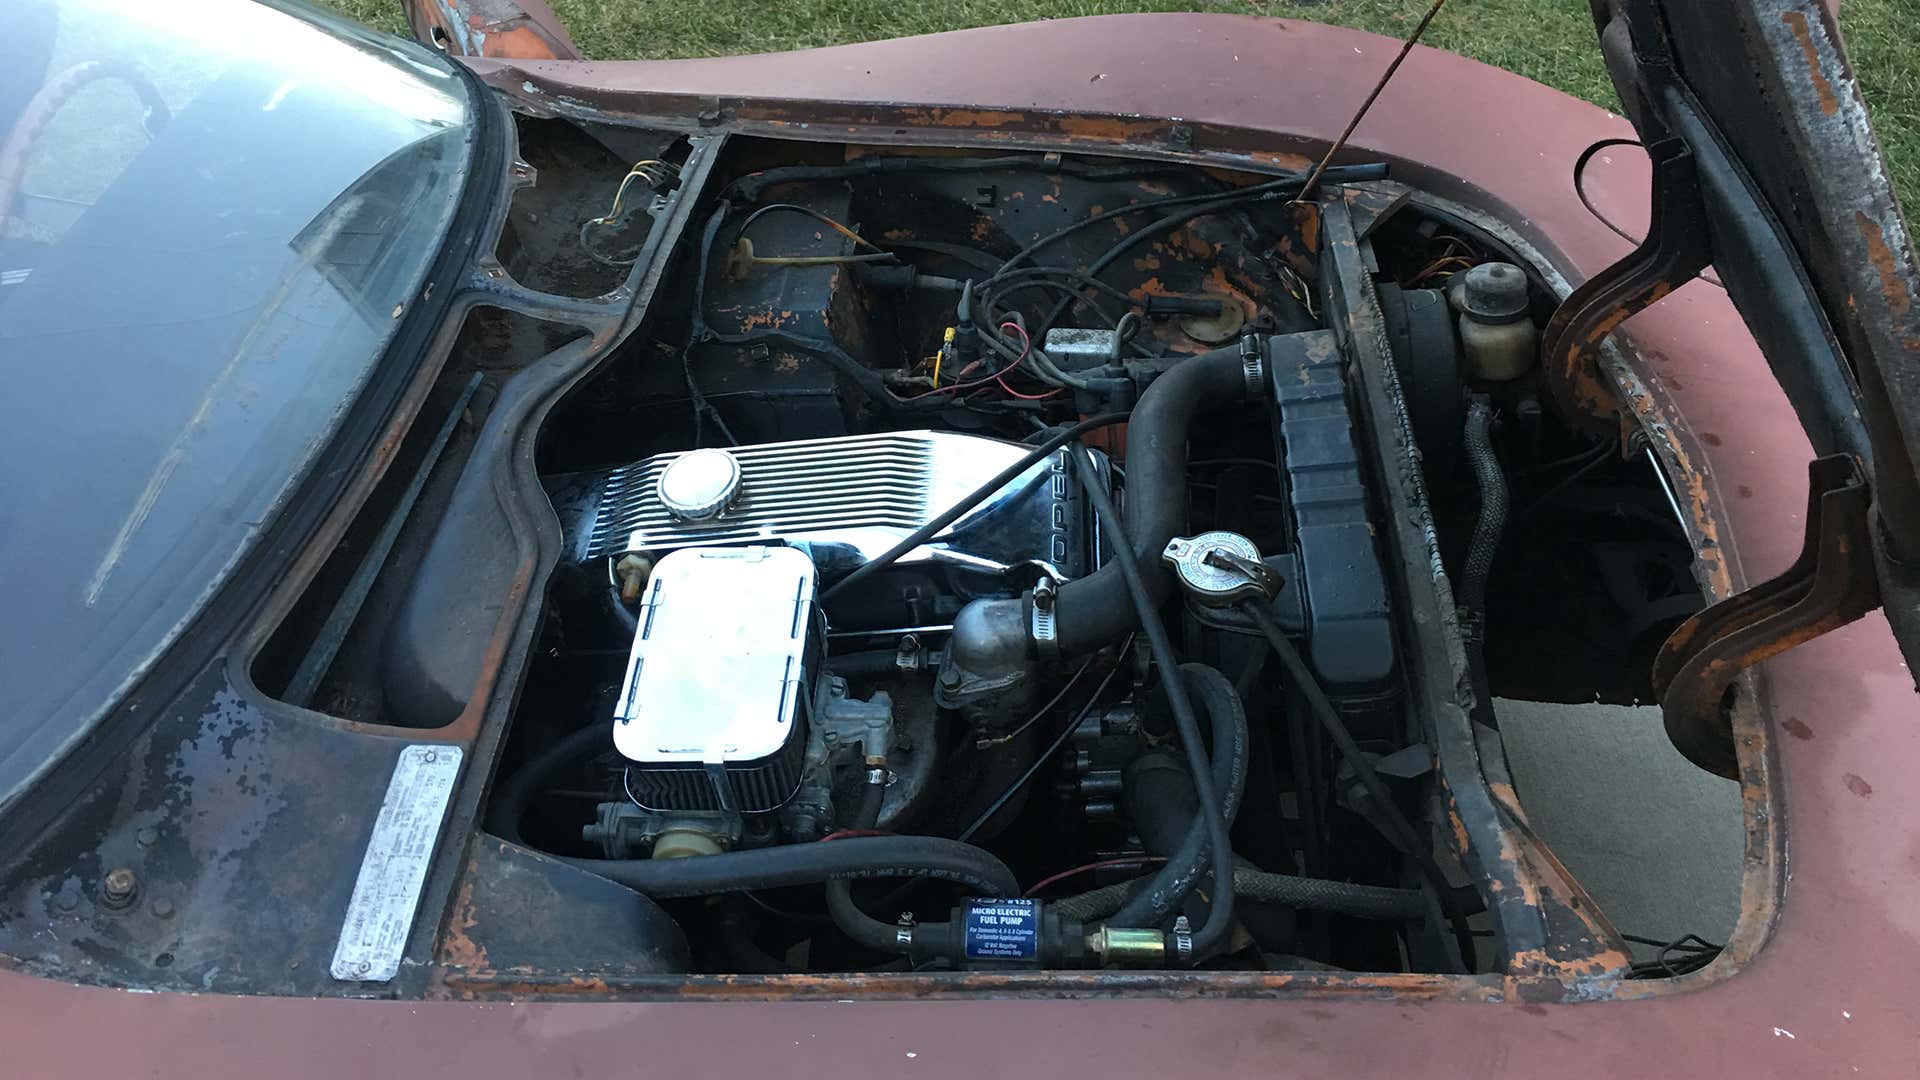 The engine bay of a 1970 Opel GT.